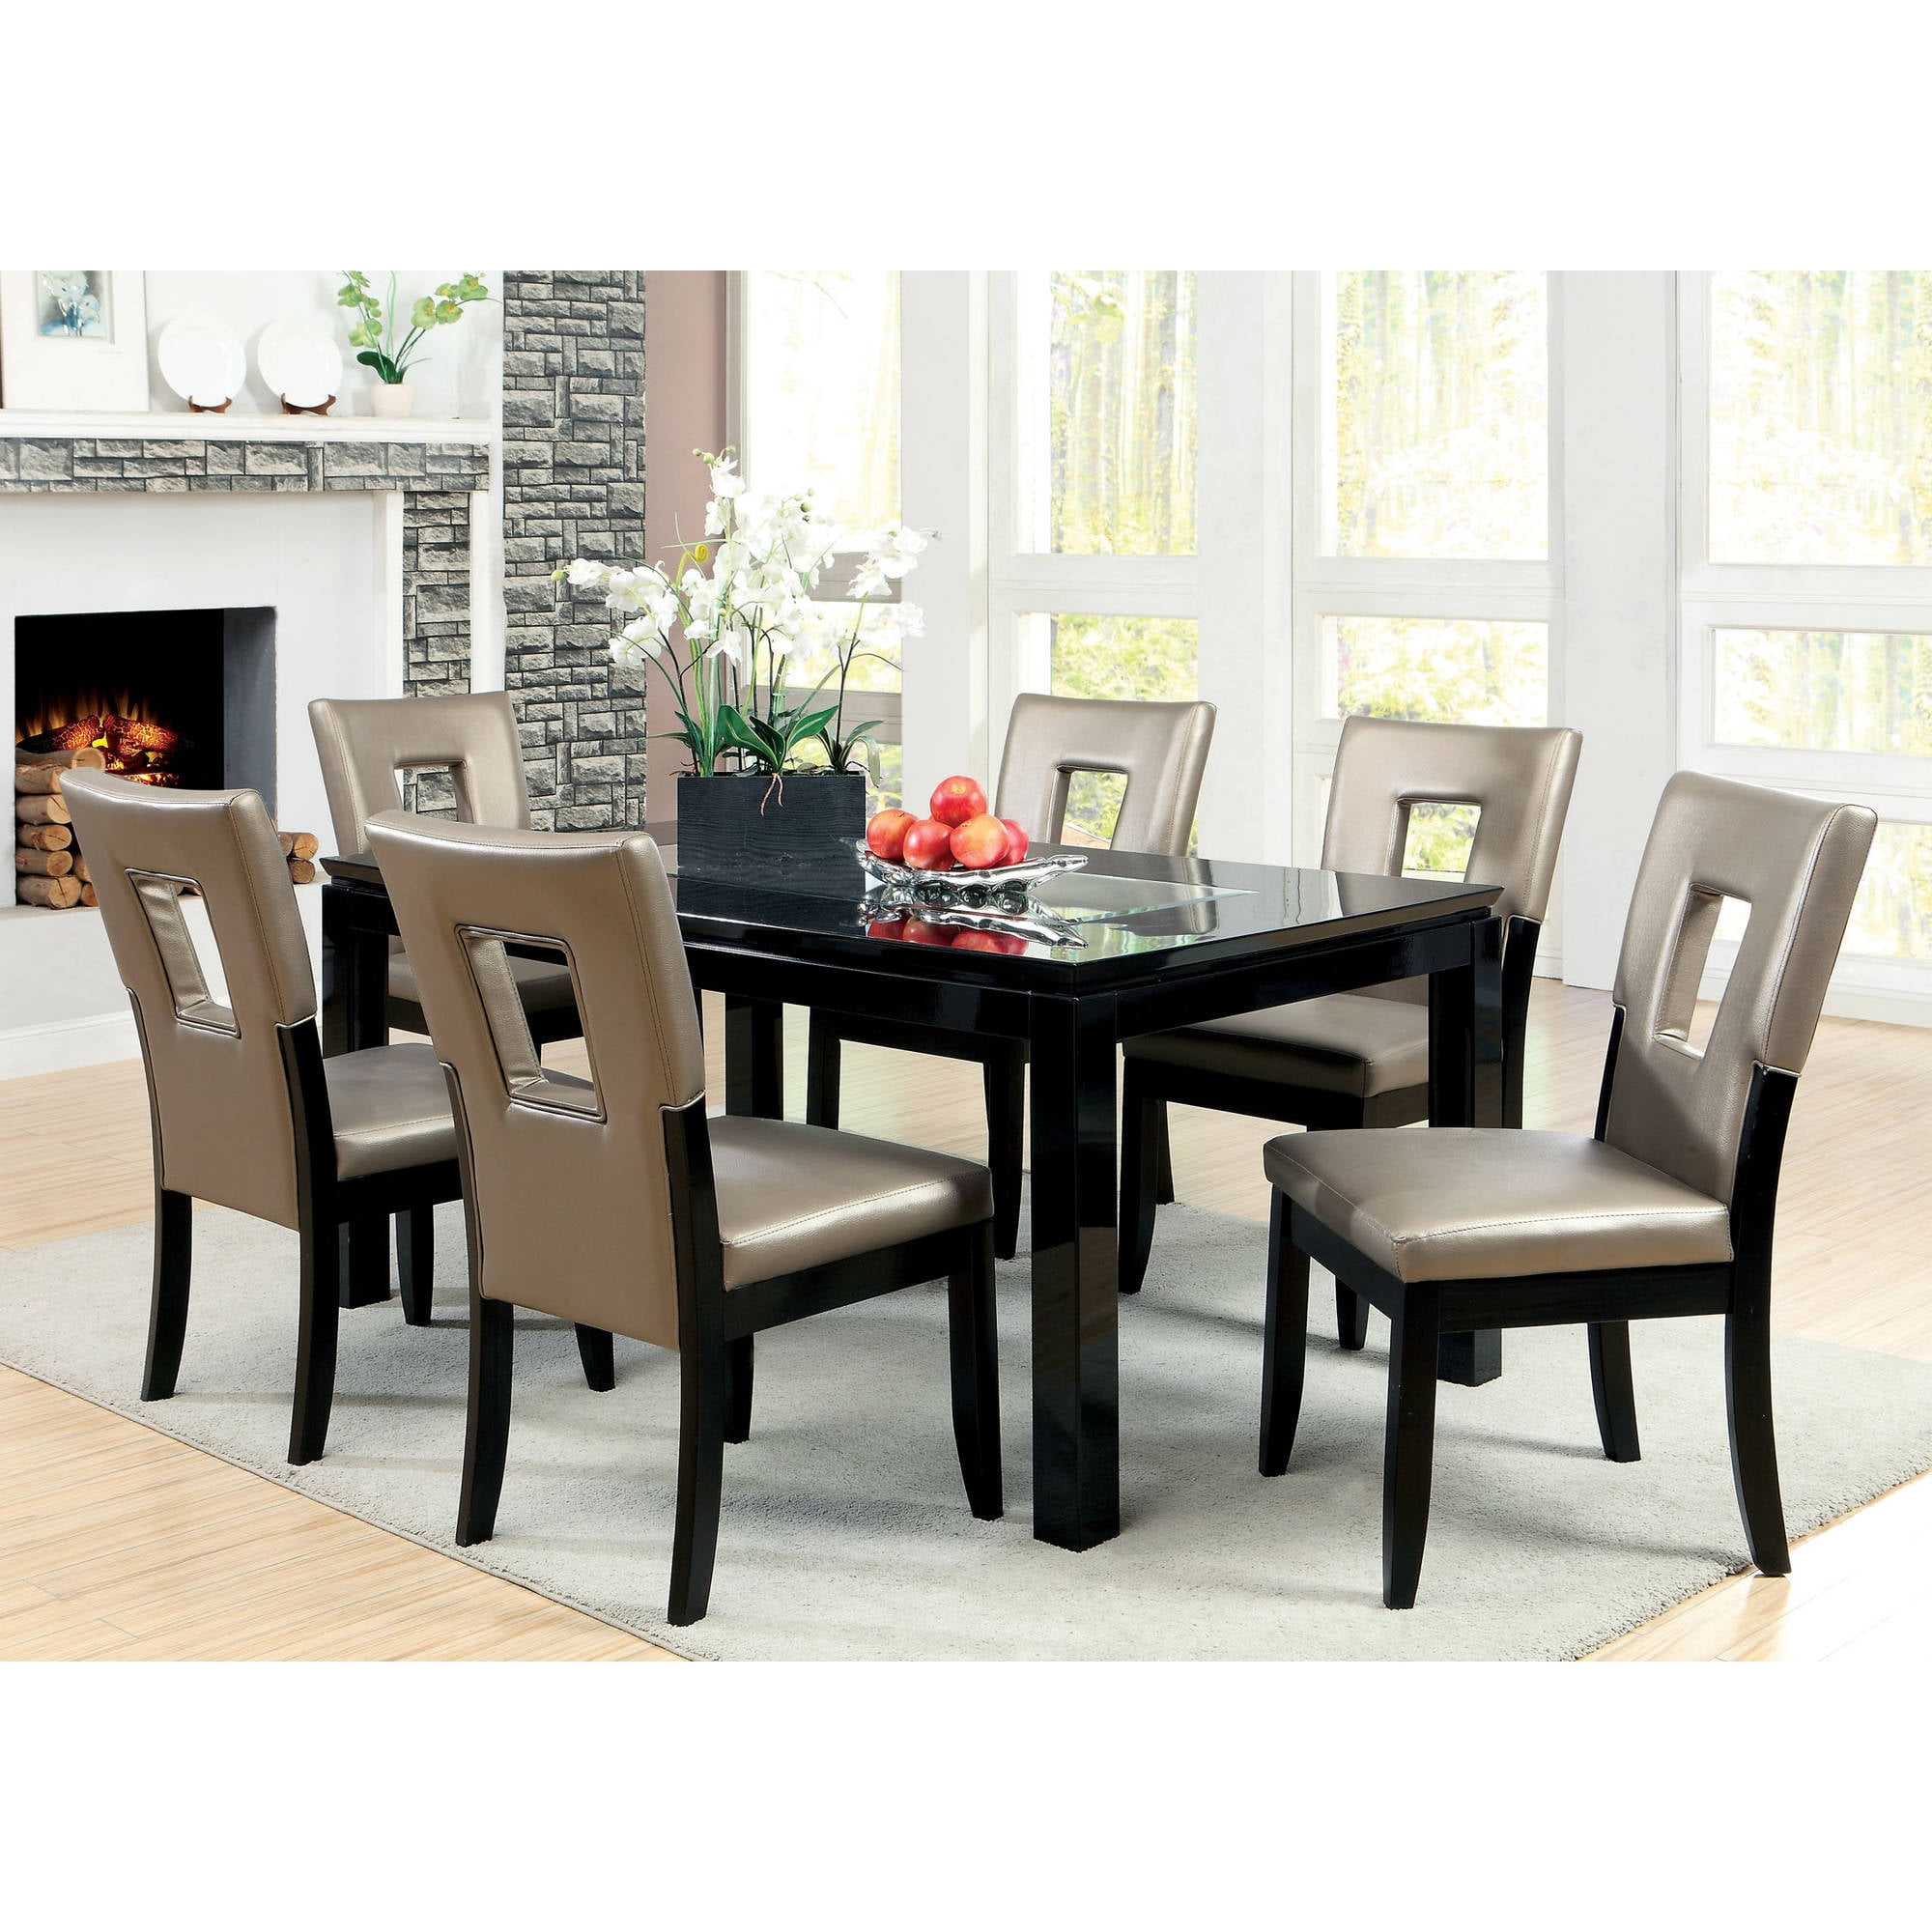  Mirrored Dining Room Furniture News Update